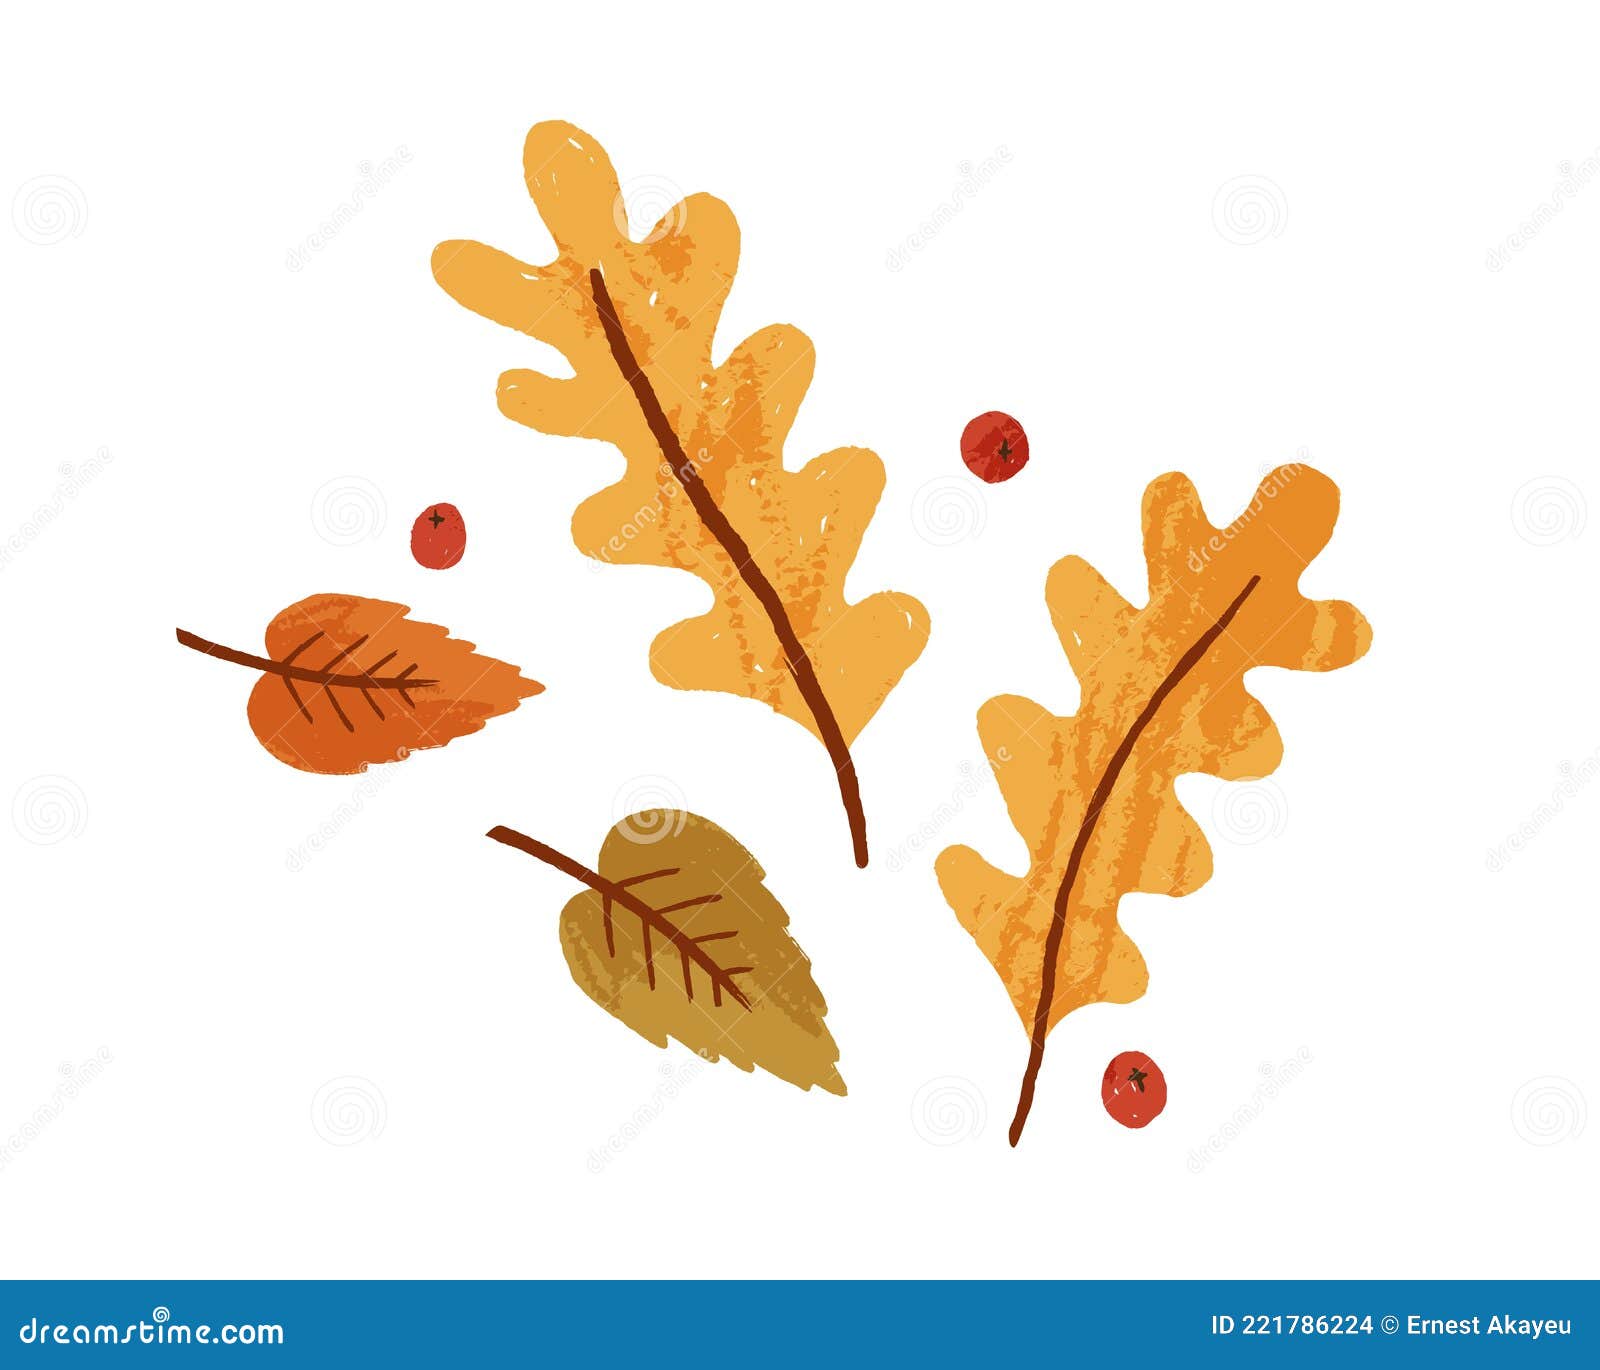 dry autumn leaves and rowan berries. fall foliage composition with oak and birch leaf. top view of autumnal leafage